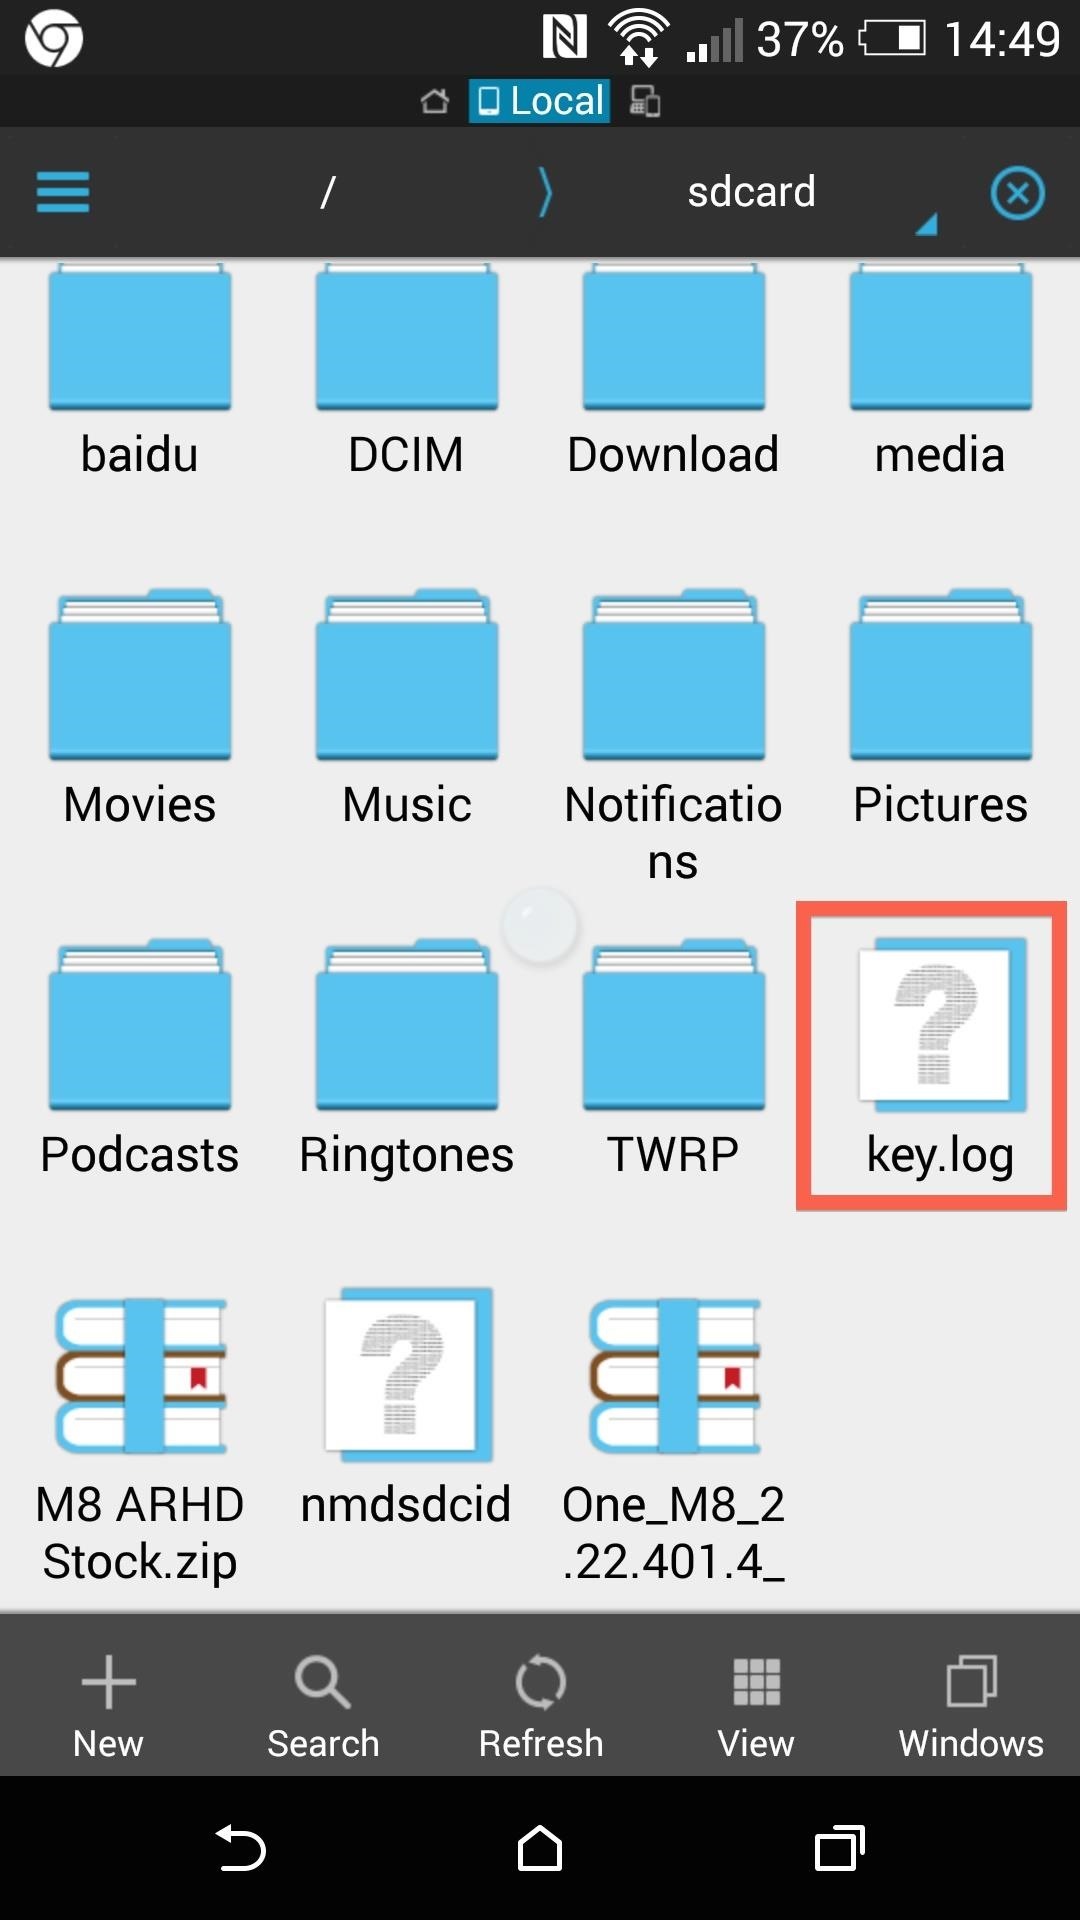 Use a Keylogger to Record What Friends Do on Your Android